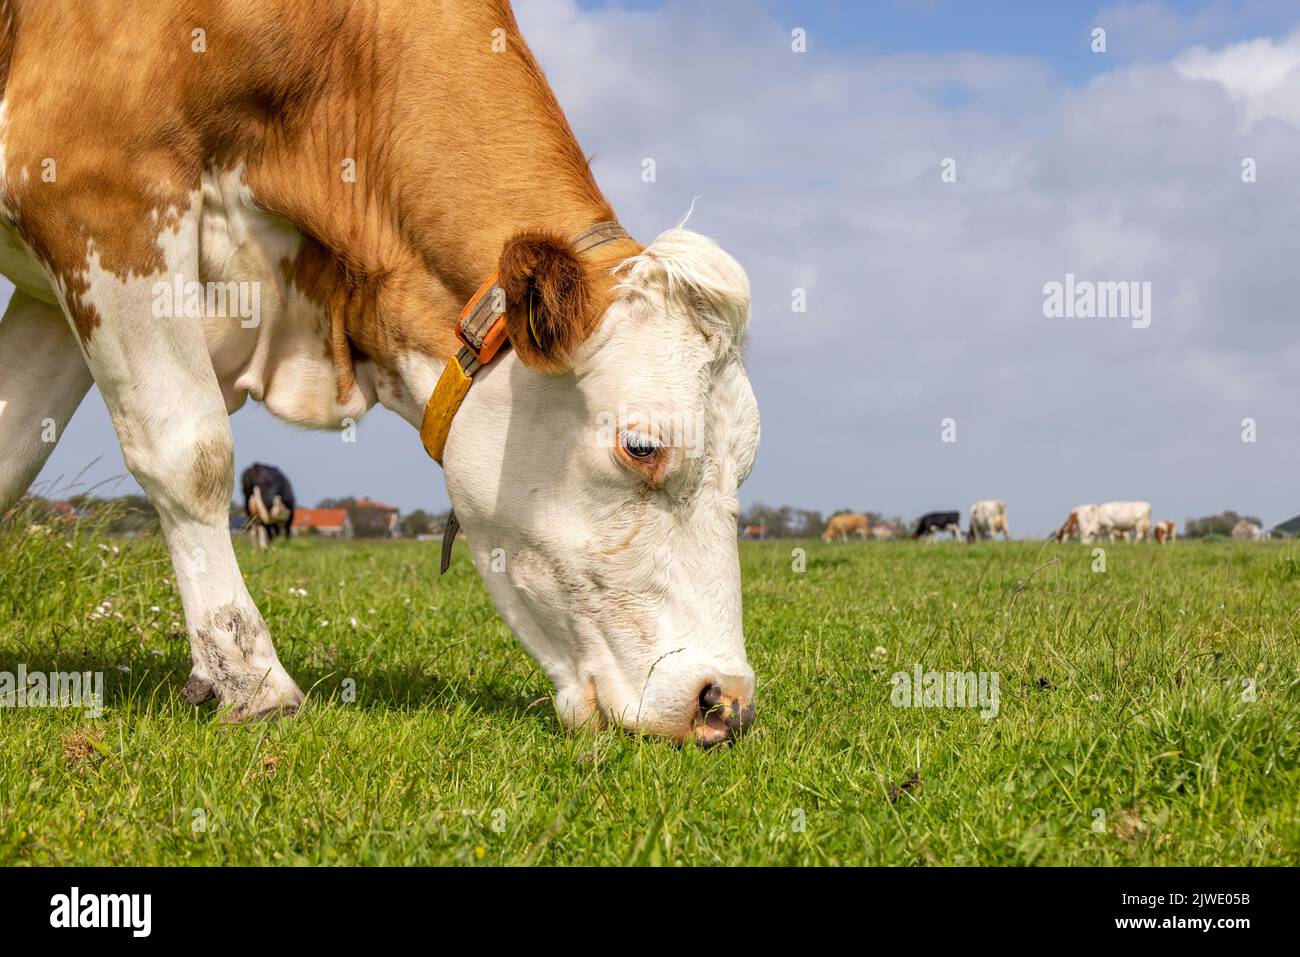 Grazing cow, eating blades of grass, red and white in a pasture, close up of a snout in a green field Stock Photo